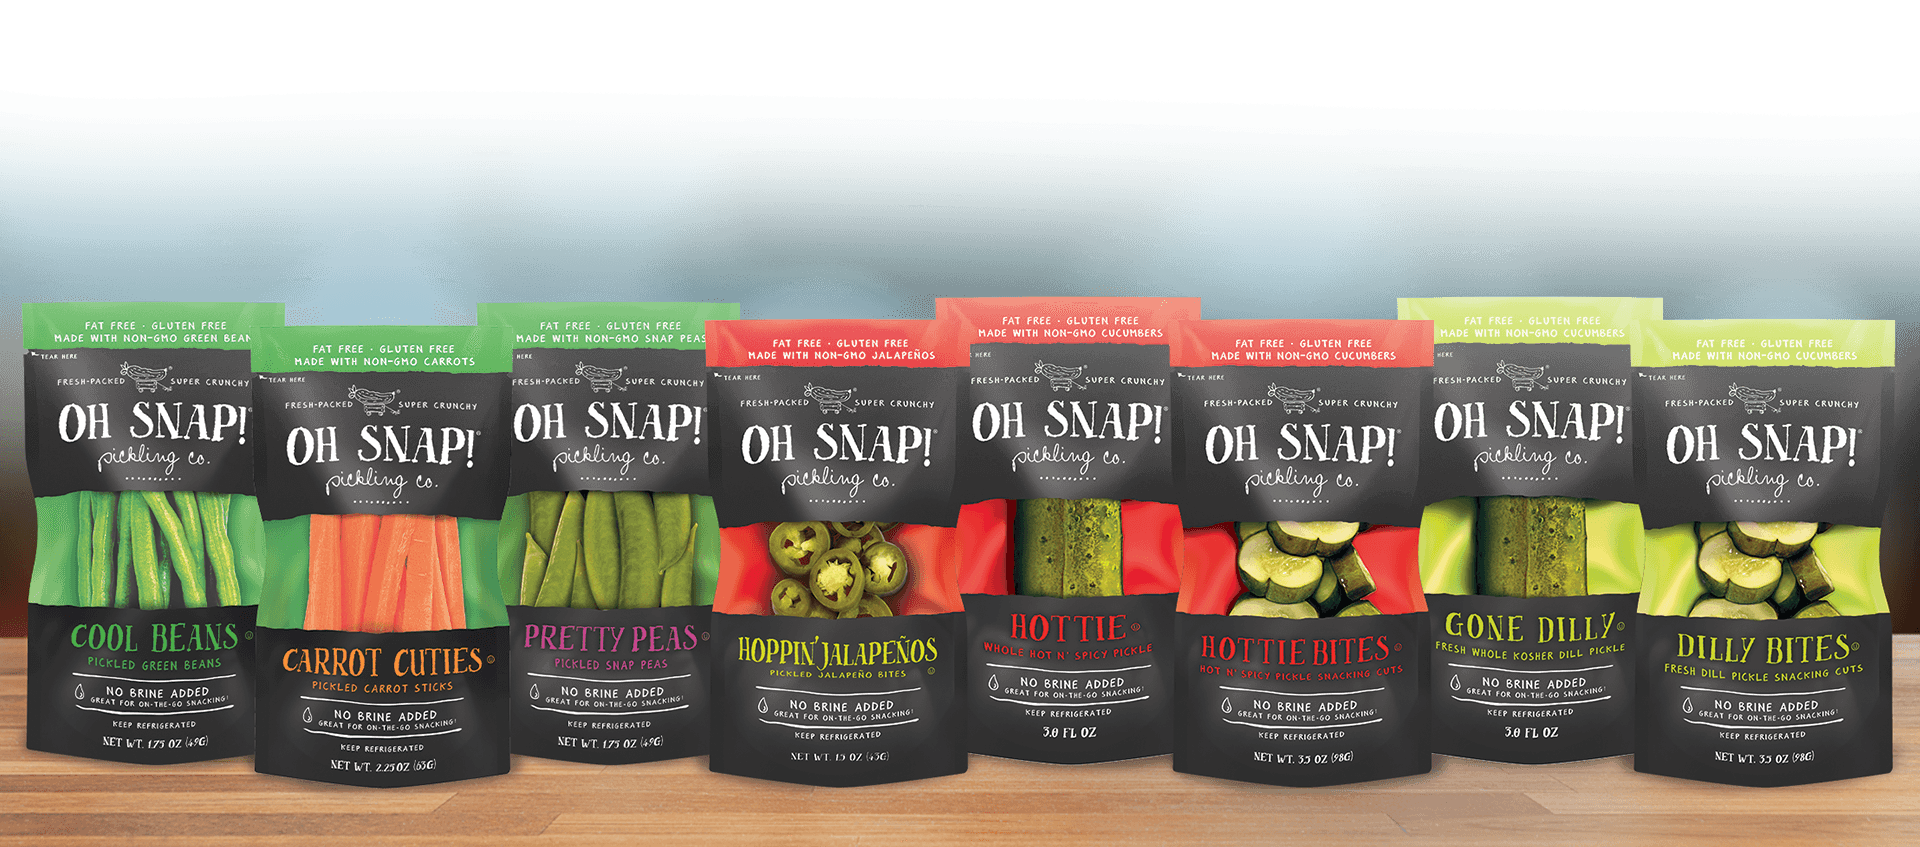 Element example of product packaging for Oh Snap! Pickles